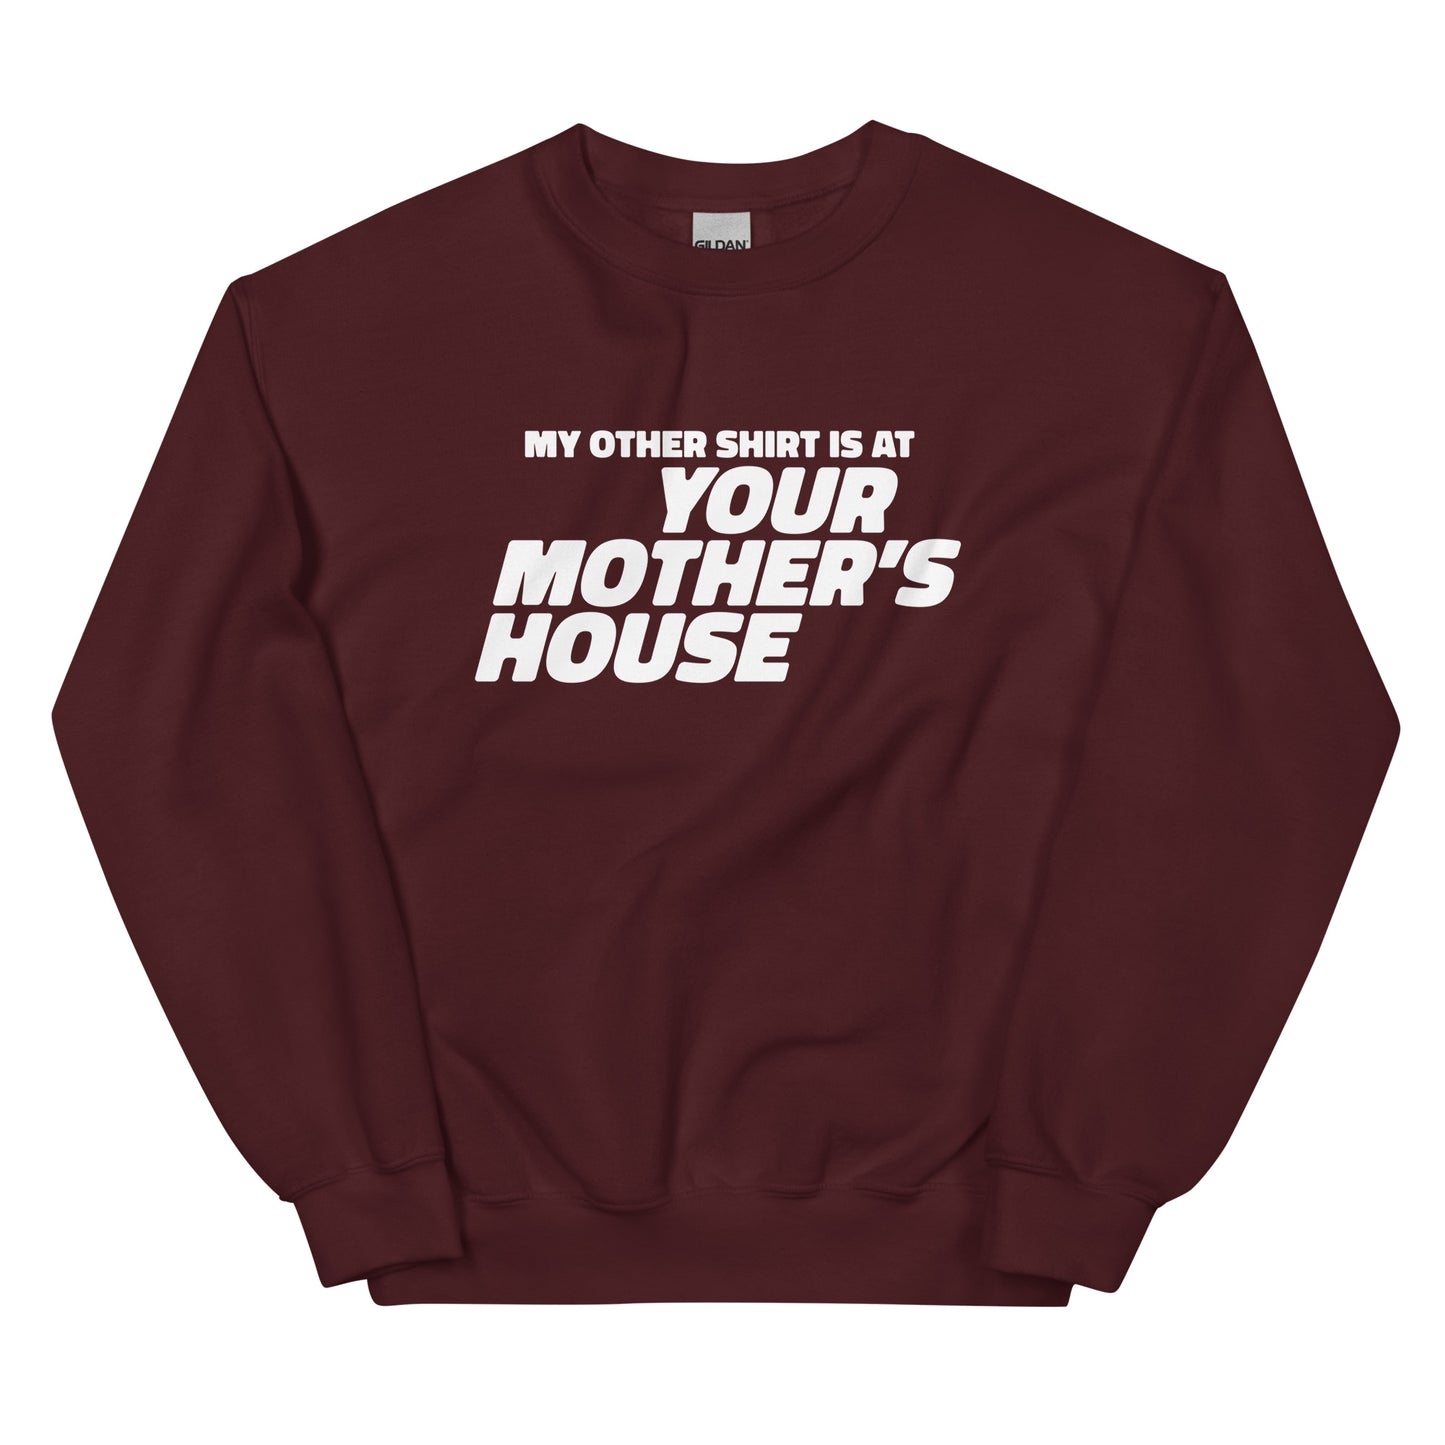 My Other Shirt is at Your Mother's House Unisex Sweatshirt